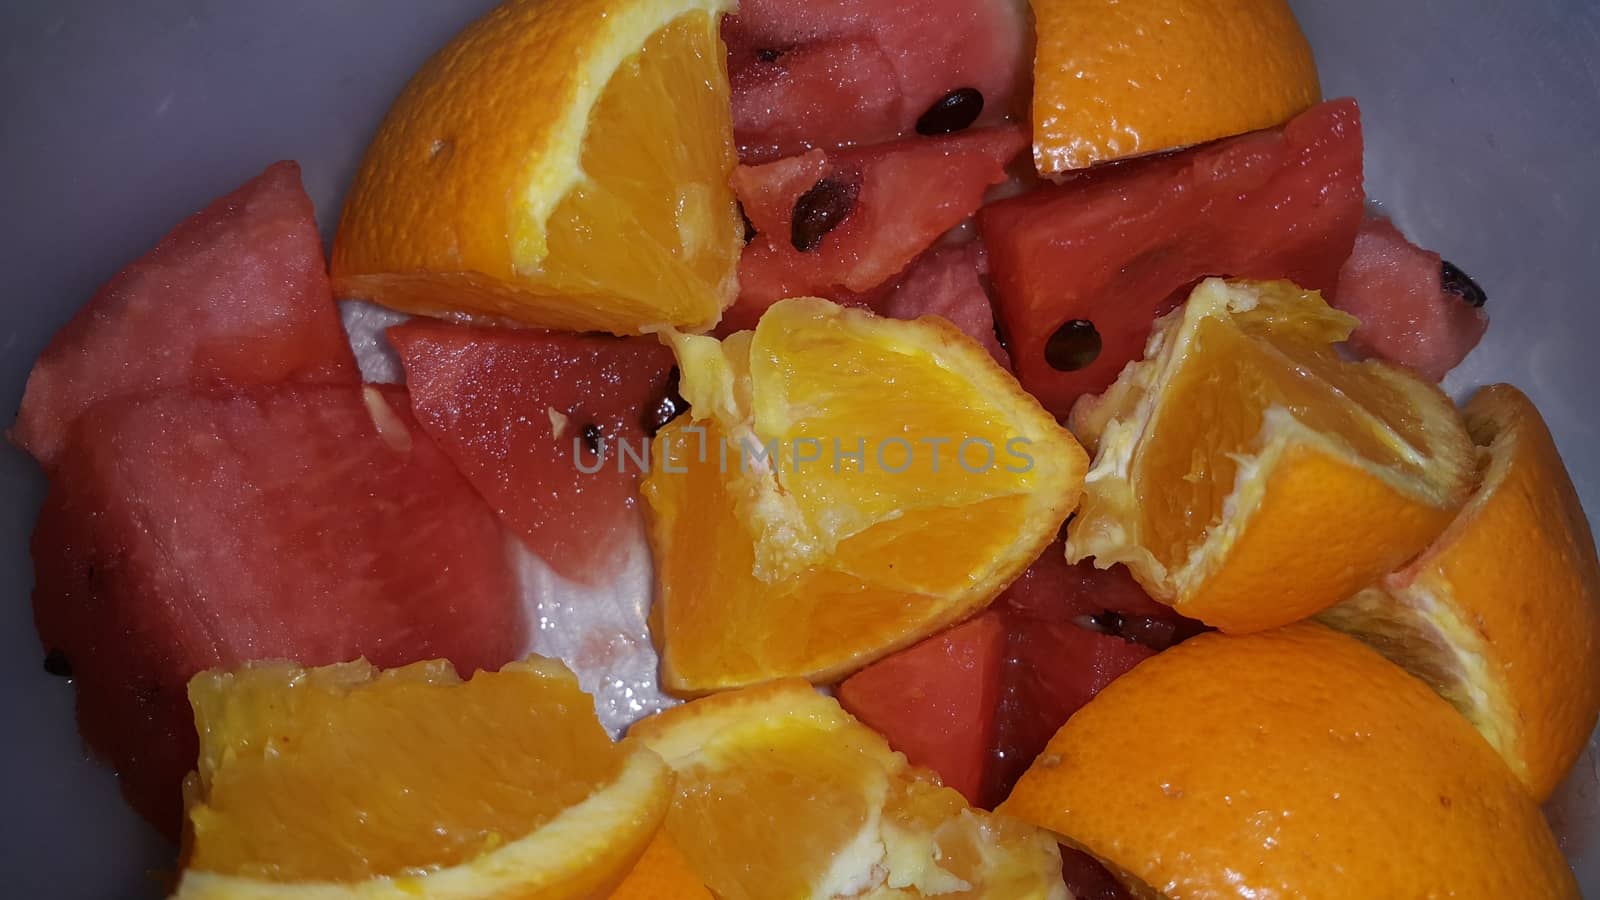 Closeup view of mixed fruits slices of oranges and red water melon served in a ceramic white plate. Water melon is sweet while oranges are citrus in taste